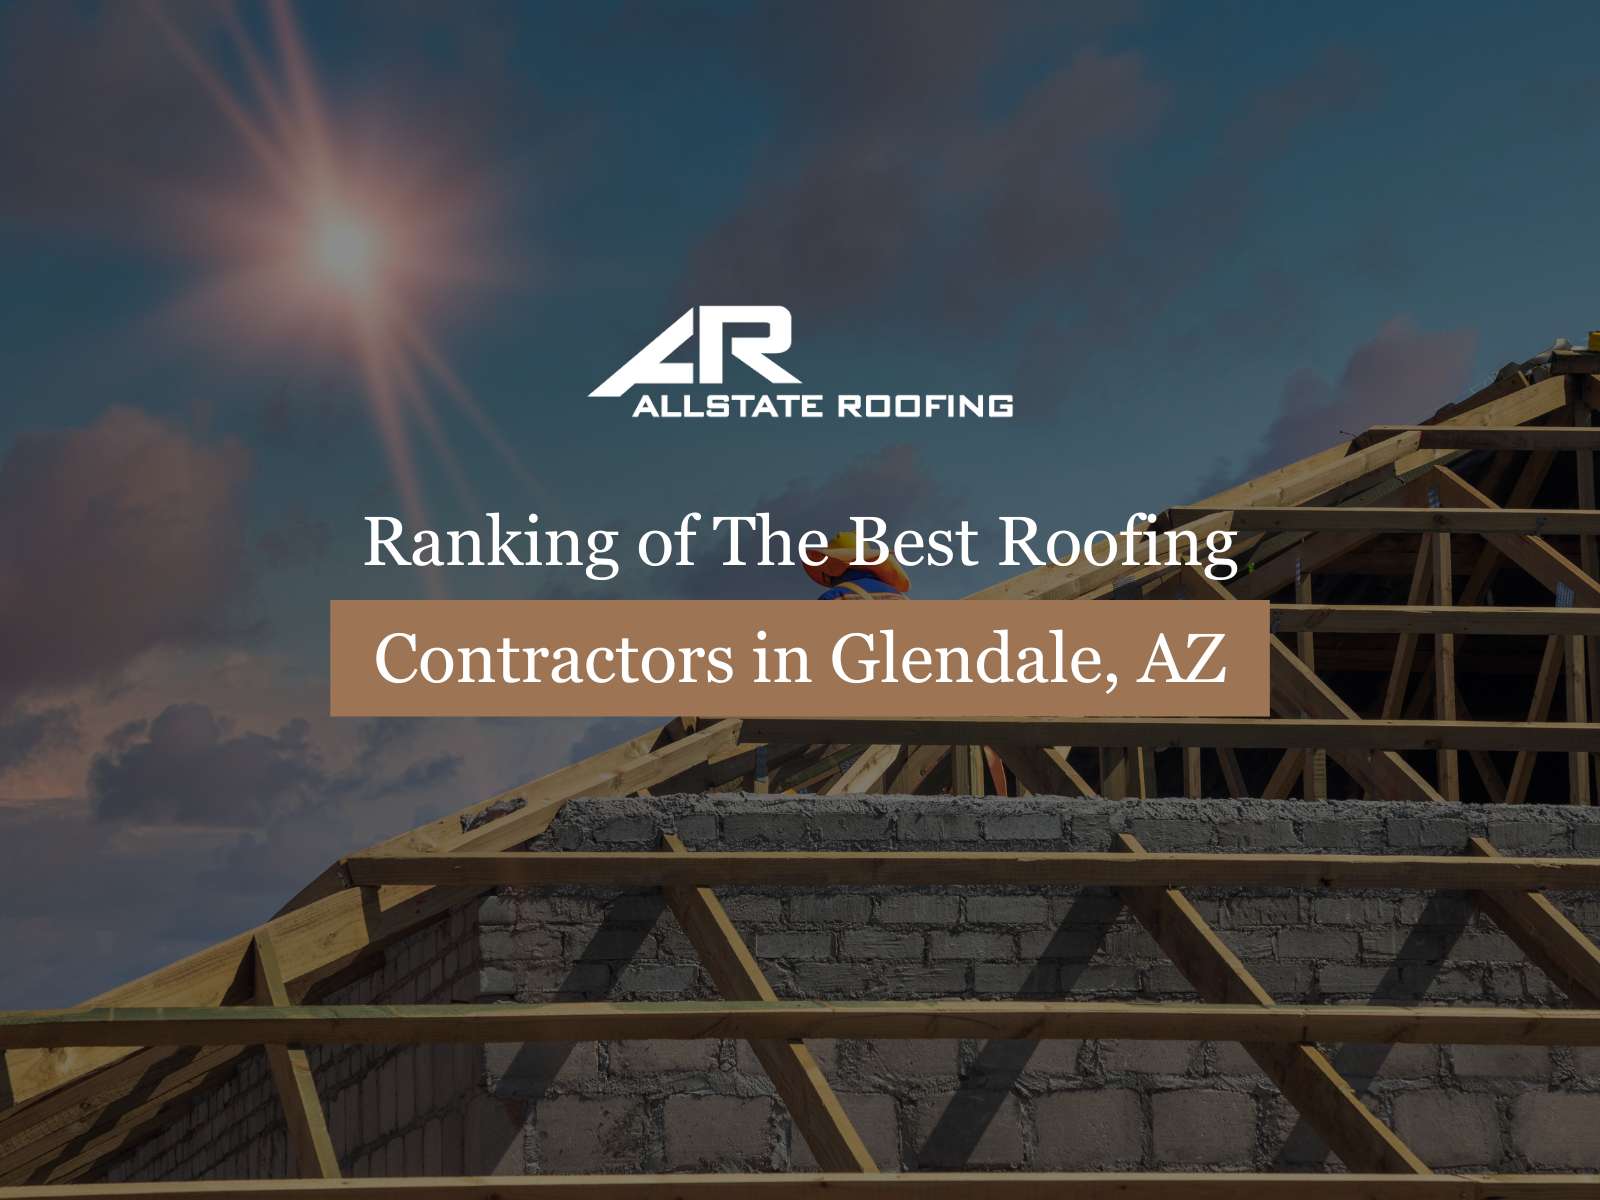 Ranking of The Best Roofing Contractors in Glendale, AZ